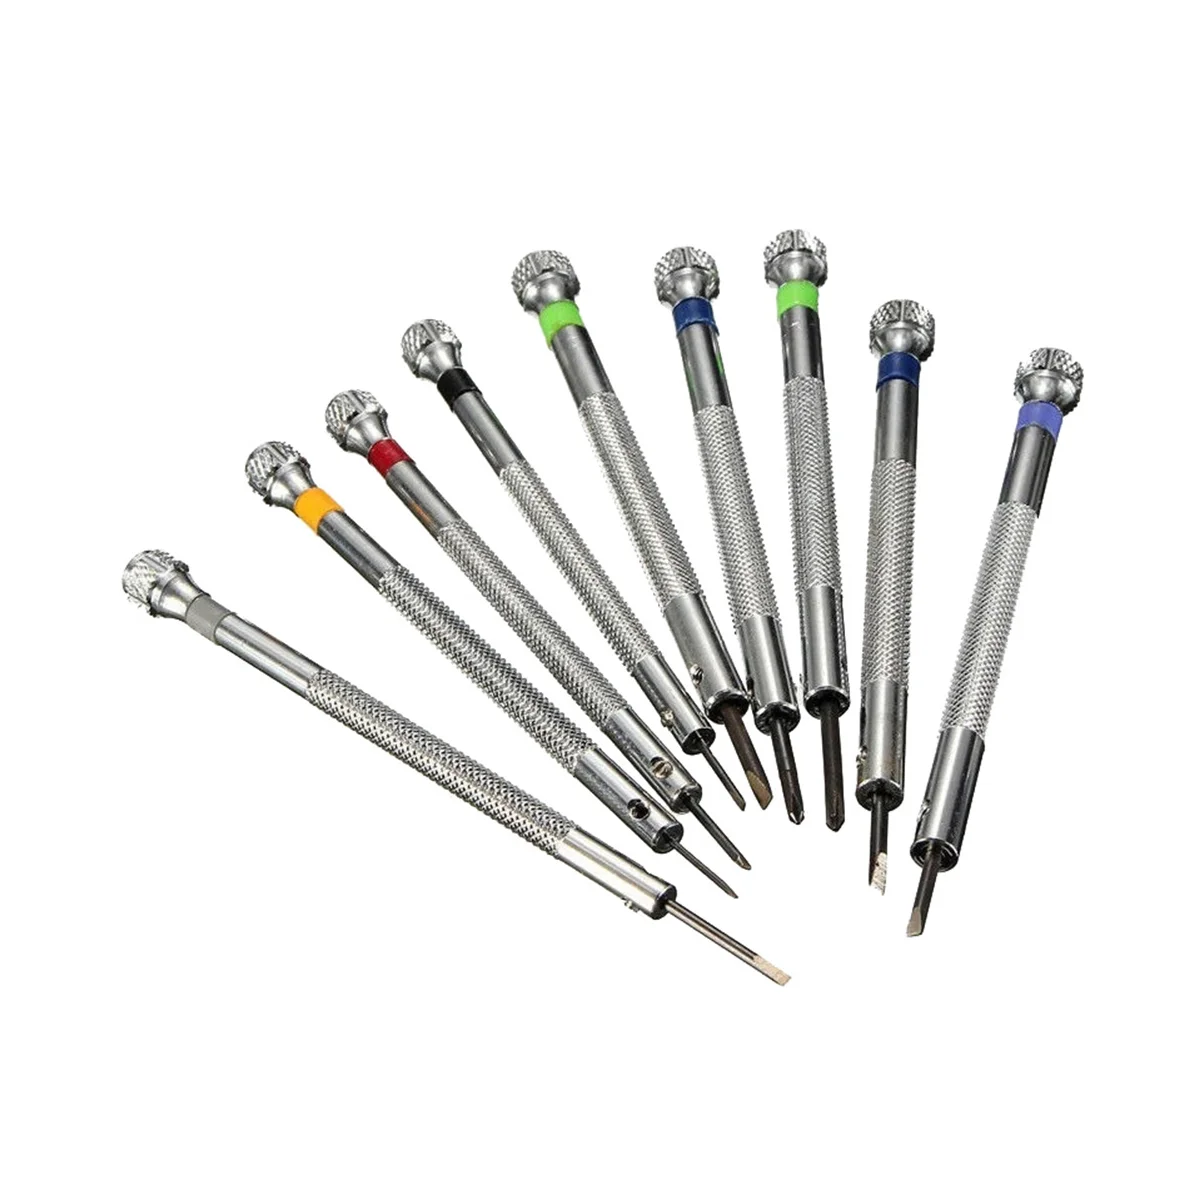 

0.5-2.5mm Steel Precision Screwdriver Set/9Pcs for Watch Repairing Portable Watchmaker Blade Assort Slotted Tools